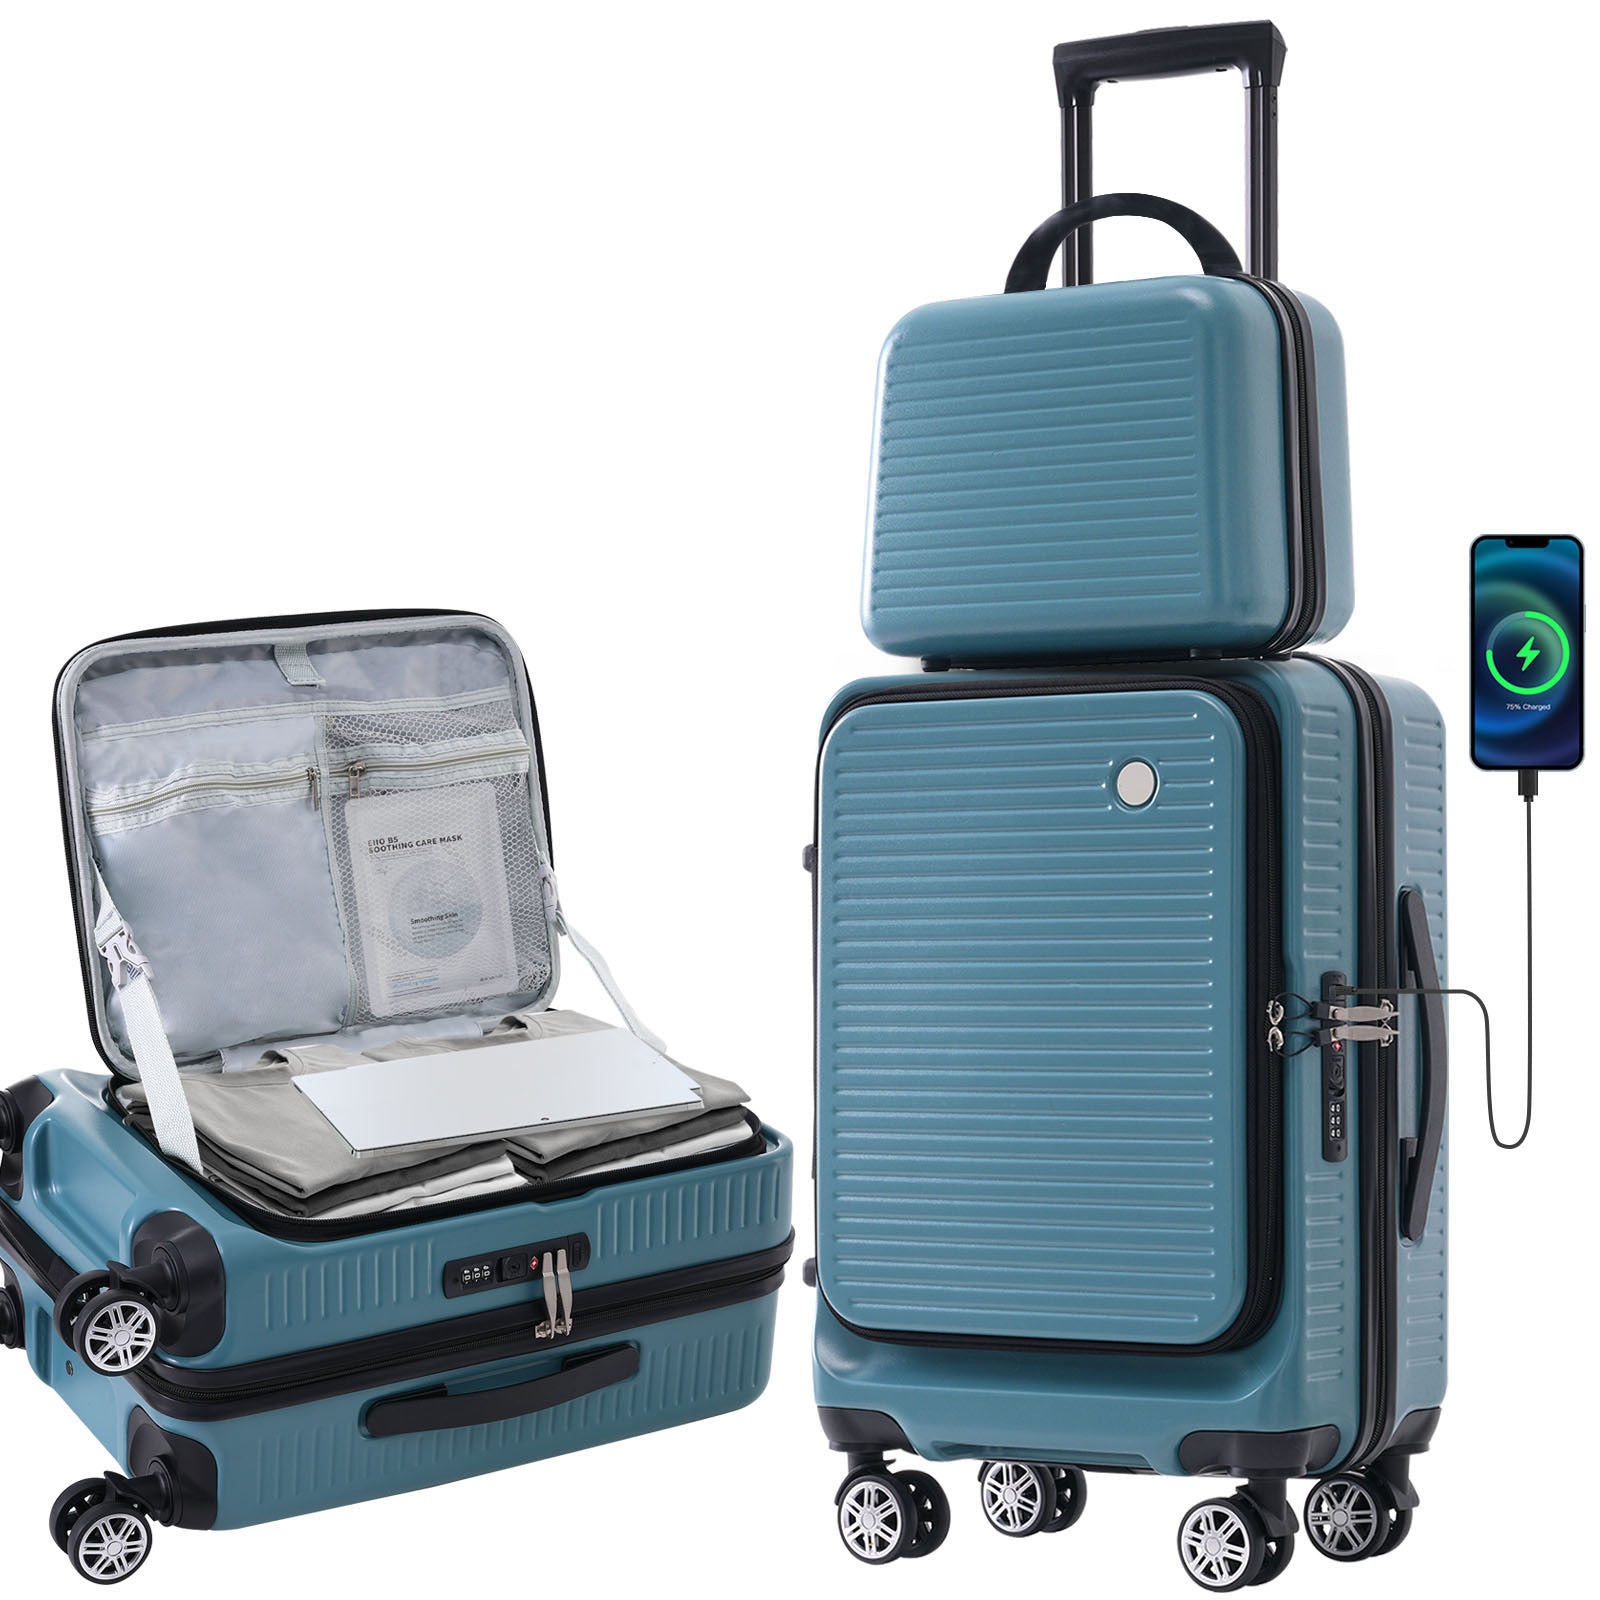 Carry on Luggage 20 Inch Front Open Luggage blue-abs